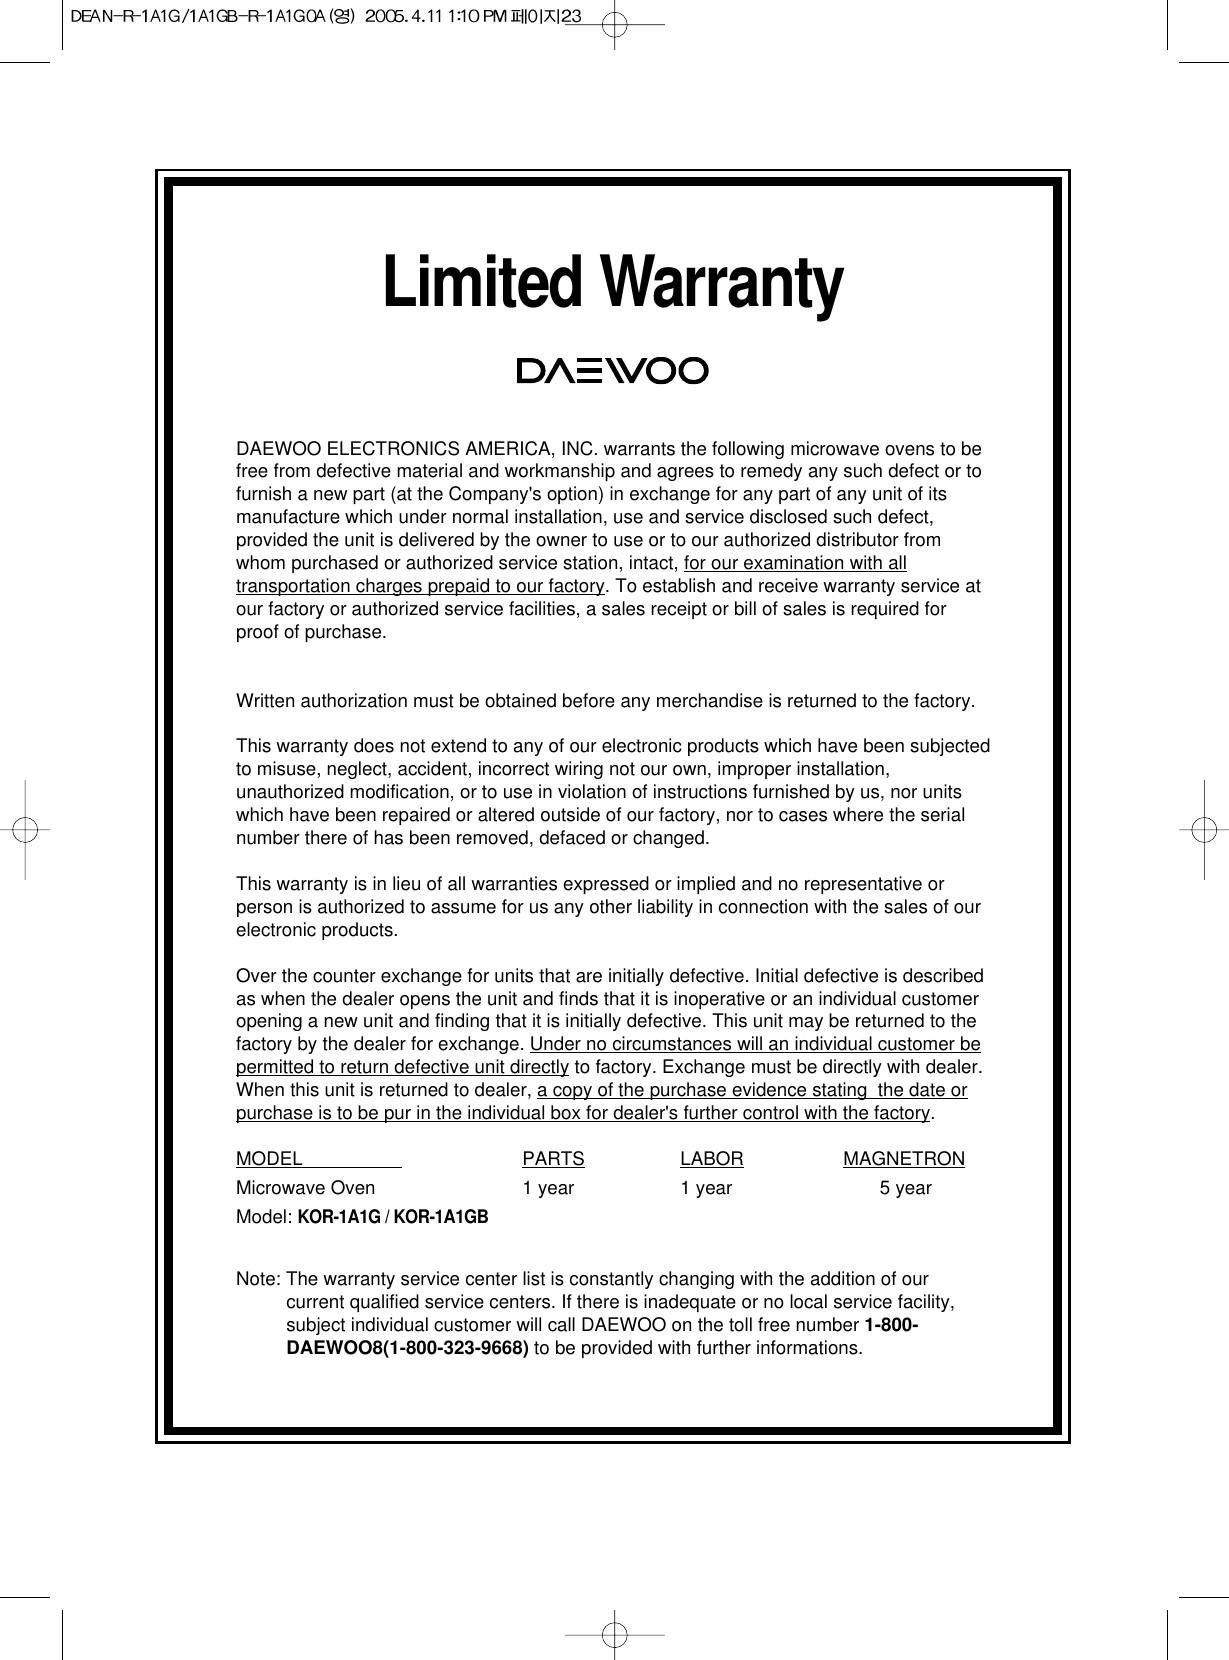 Limited WarrantyDAEWOO ELECTRONICS AMERICA, INC. warrants the following microwave ovens to befree from defective material and workmanship and agrees to remedy any such defect or tofurnish a new part (at the Company&apos;s option) in exchange for any part of any unit of itsmanufacture which under normal installation, use and service disclosed such defect,provided the unit is delivered by the owner to use or to our authorized distributor fromwhom purchased or authorized service station, intact, for our examination with alltransportation charges prepaid to our factory. To establish and receive warranty service atour factory or authorized service facilities, a sales receipt or bill of sales is required forproof of purchase.Written authorization must be obtained before any merchandise is returned to the factory.This warranty does not extend to any of our electronic products which have been subjectedto misuse, neglect, accident, incorrect wiring not our own, improper installation,unauthorized modification, or to use in violation of instructions furnished by us, nor unitswhich have been repaired or altered outside of our factory, nor to cases where the serialnumber there of has been removed, defaced or changed.This warranty is in lieu of all warranties expressed or implied and no representative orperson is authorized to assume for us any other liability in connection with the sales of ourelectronic products.Over the counter exchange for units that are initially defective. Initial defective is describedas when the dealer opens the unit and finds that it is inoperative or an individual customeropening a new unit and finding that it is initially defective. This unit may be returned to thefactory by the dealer for exchange. Under no circumstances will an individual customer bepermitted to return defective unit directly to factory. Exchange must be directly with dealer.When this unit is returned to dealer, a copy of the purchase evidence stating  the date orpurchase is to be pur in the individual box for dealer&apos;s further control with the factory.MODEL                    PARTS LABOR MAGNETRONMicrowave Oven 1 year 1 year 5 yearModel: KOR-1A1G / KOR-1A1GBNote: The warranty service center list is constantly changing with the addition of ourcurrent qualified service centers. If there is inadequate or no local service facility,subject individual customer will call DAEWOO on the toll free number 1-800-DAEWOO8(1-800-323-9668) to be provided with further informations.